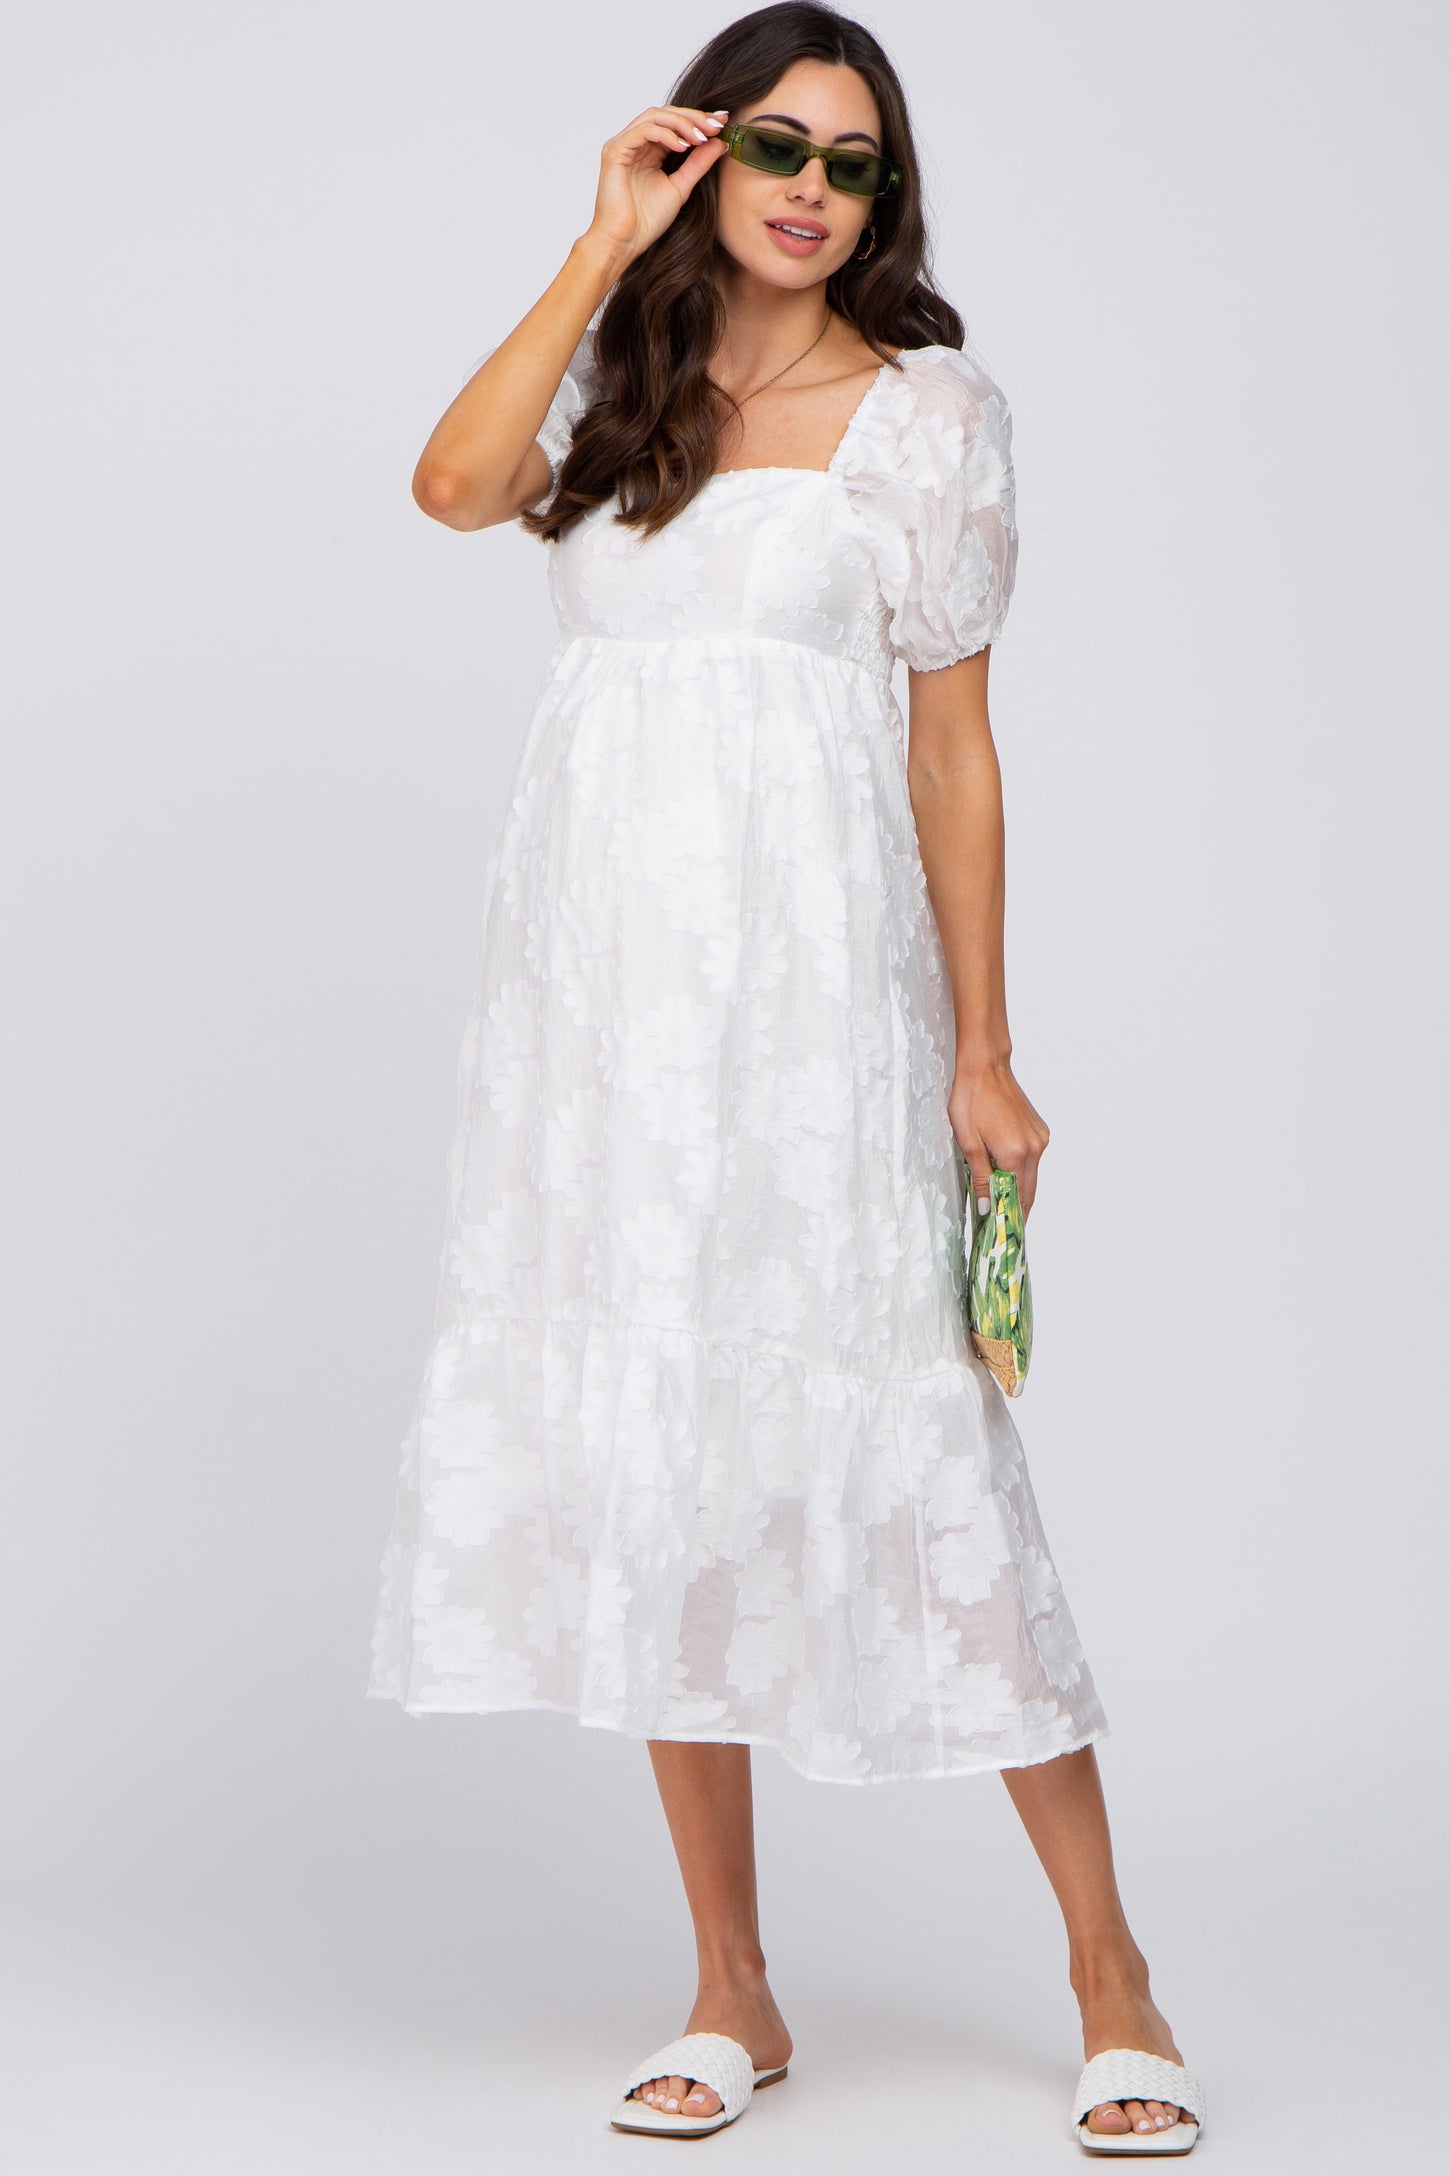 White Textured Floral Puff Sleeve Maternity Dress